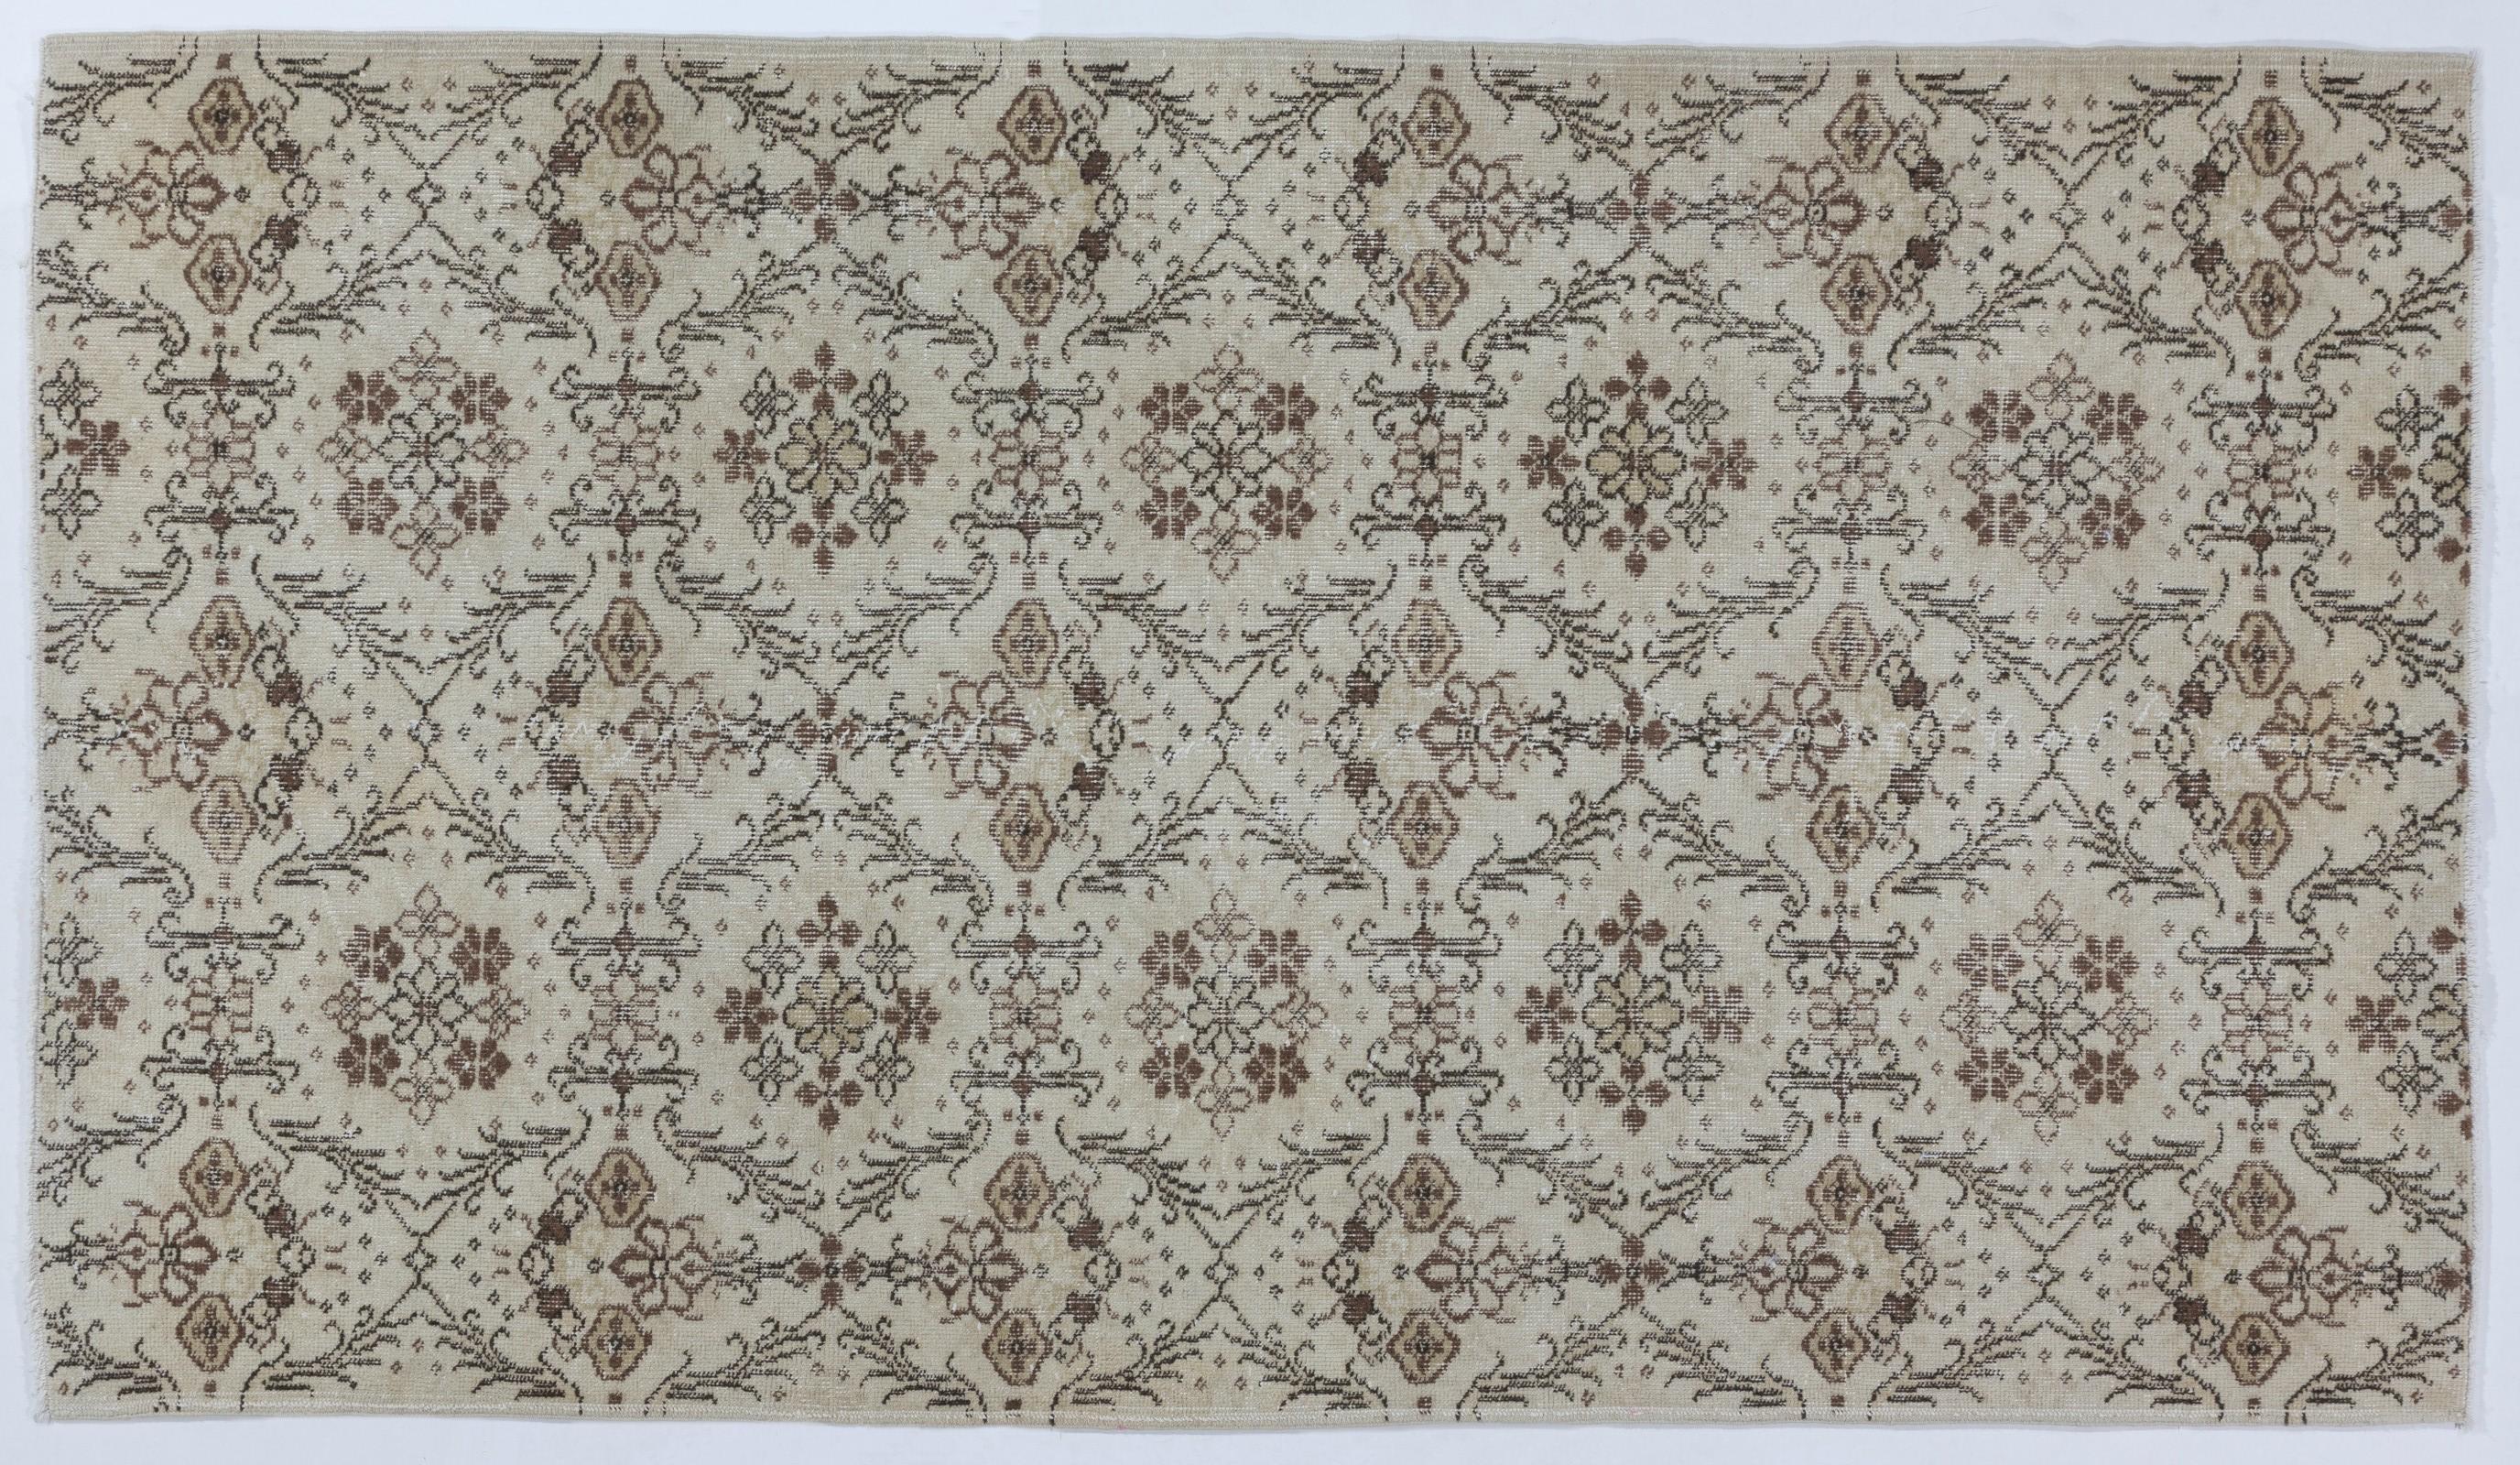 4x7 ft Vintage Handmade Turkish Accent Rug, Ideal for Home and Office In Good Condition For Sale In Philadelphia, PA